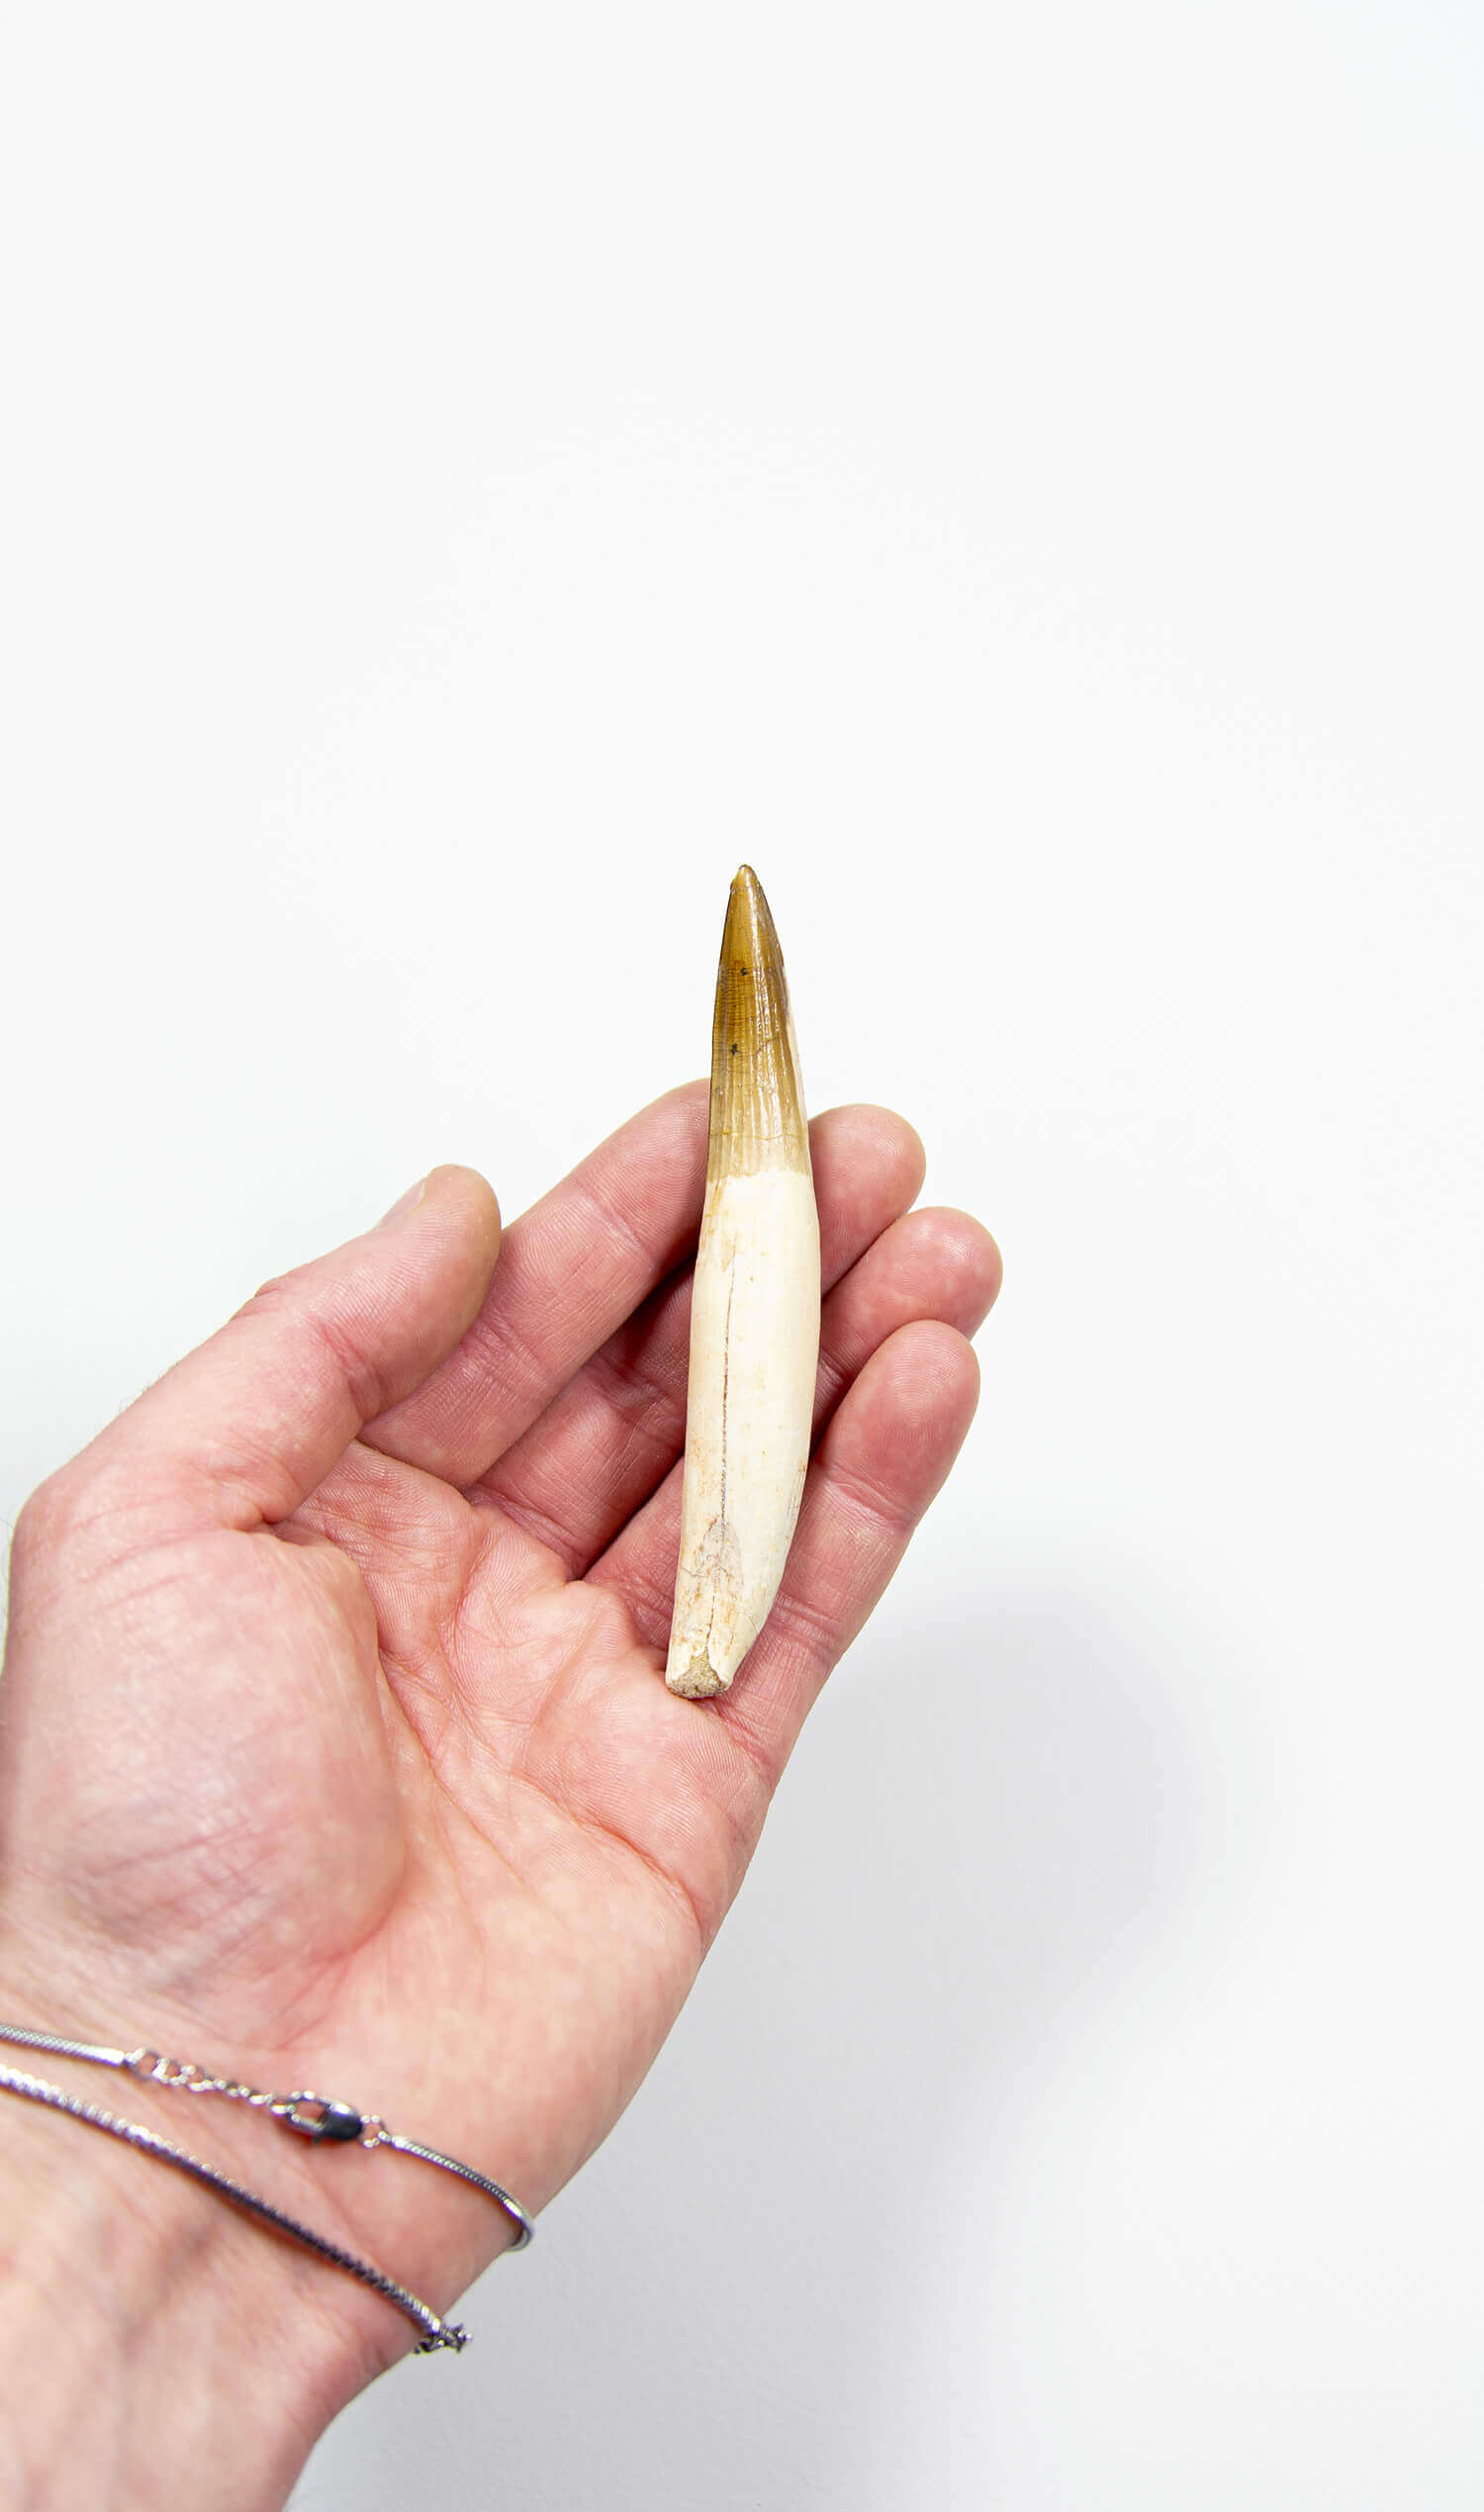 fossil dinosaur spinosaurus tooth for sale at the uk fossil store 110